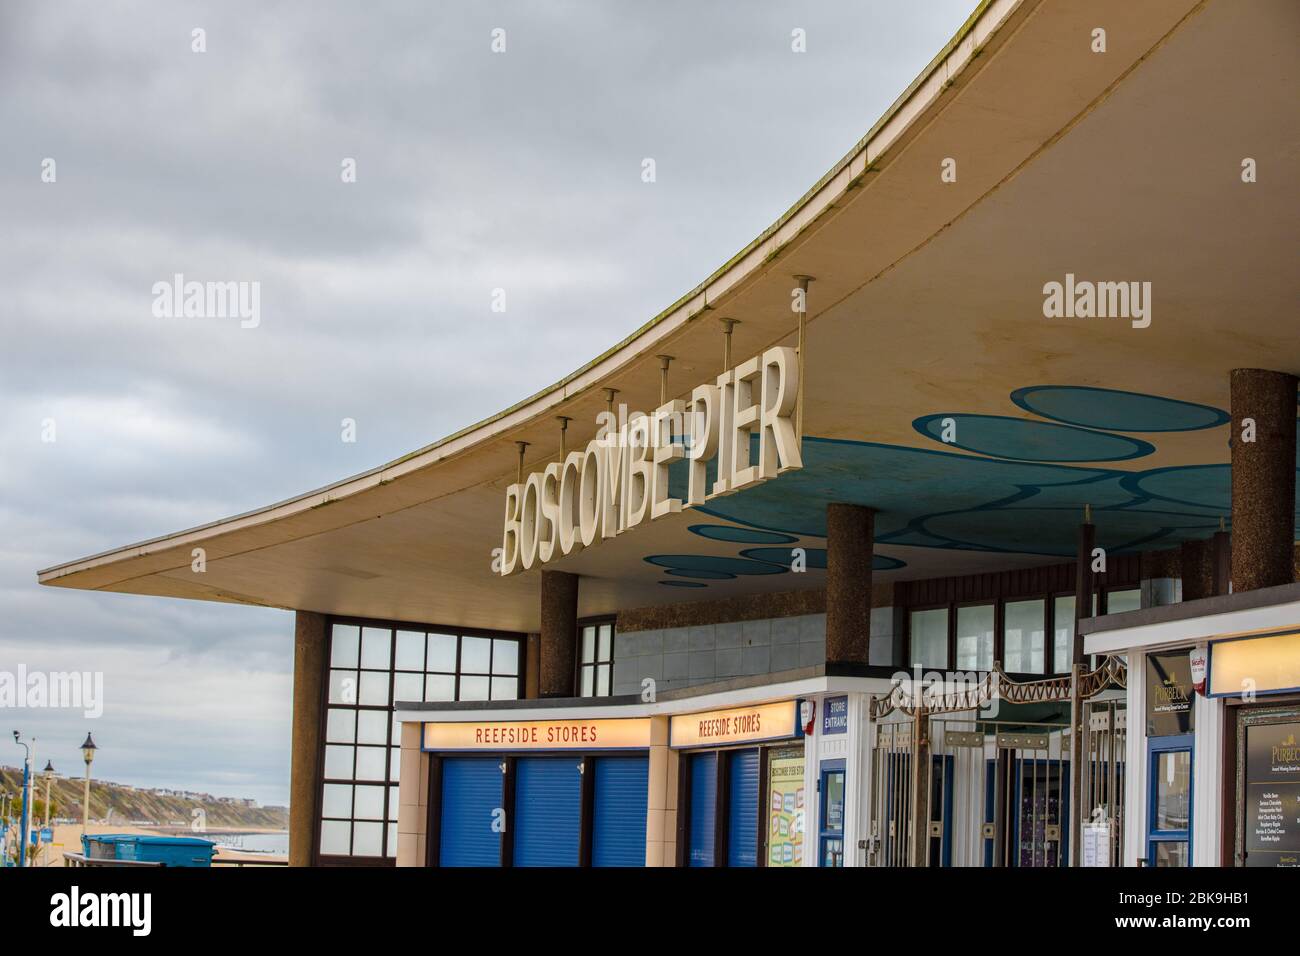 Boscombe, Dorset, UK-December 5th,2017:Restored Victorian pier, with lamps, kiosks and wooden boarding,hosting art exhibitions and events. Stock Photo